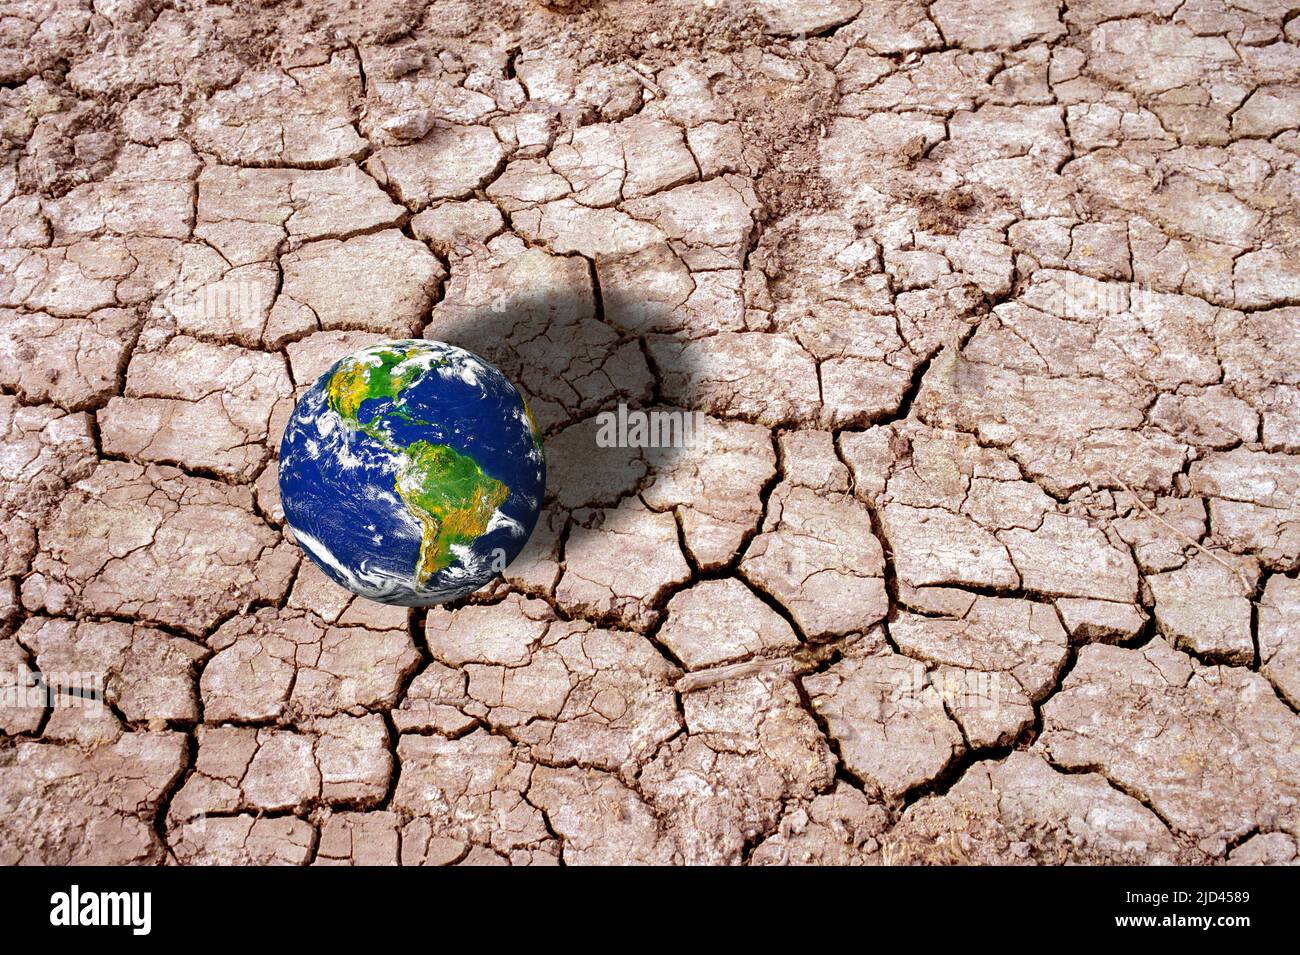 Planet Earth on cracked mud, conceptual illustration Stock Photo